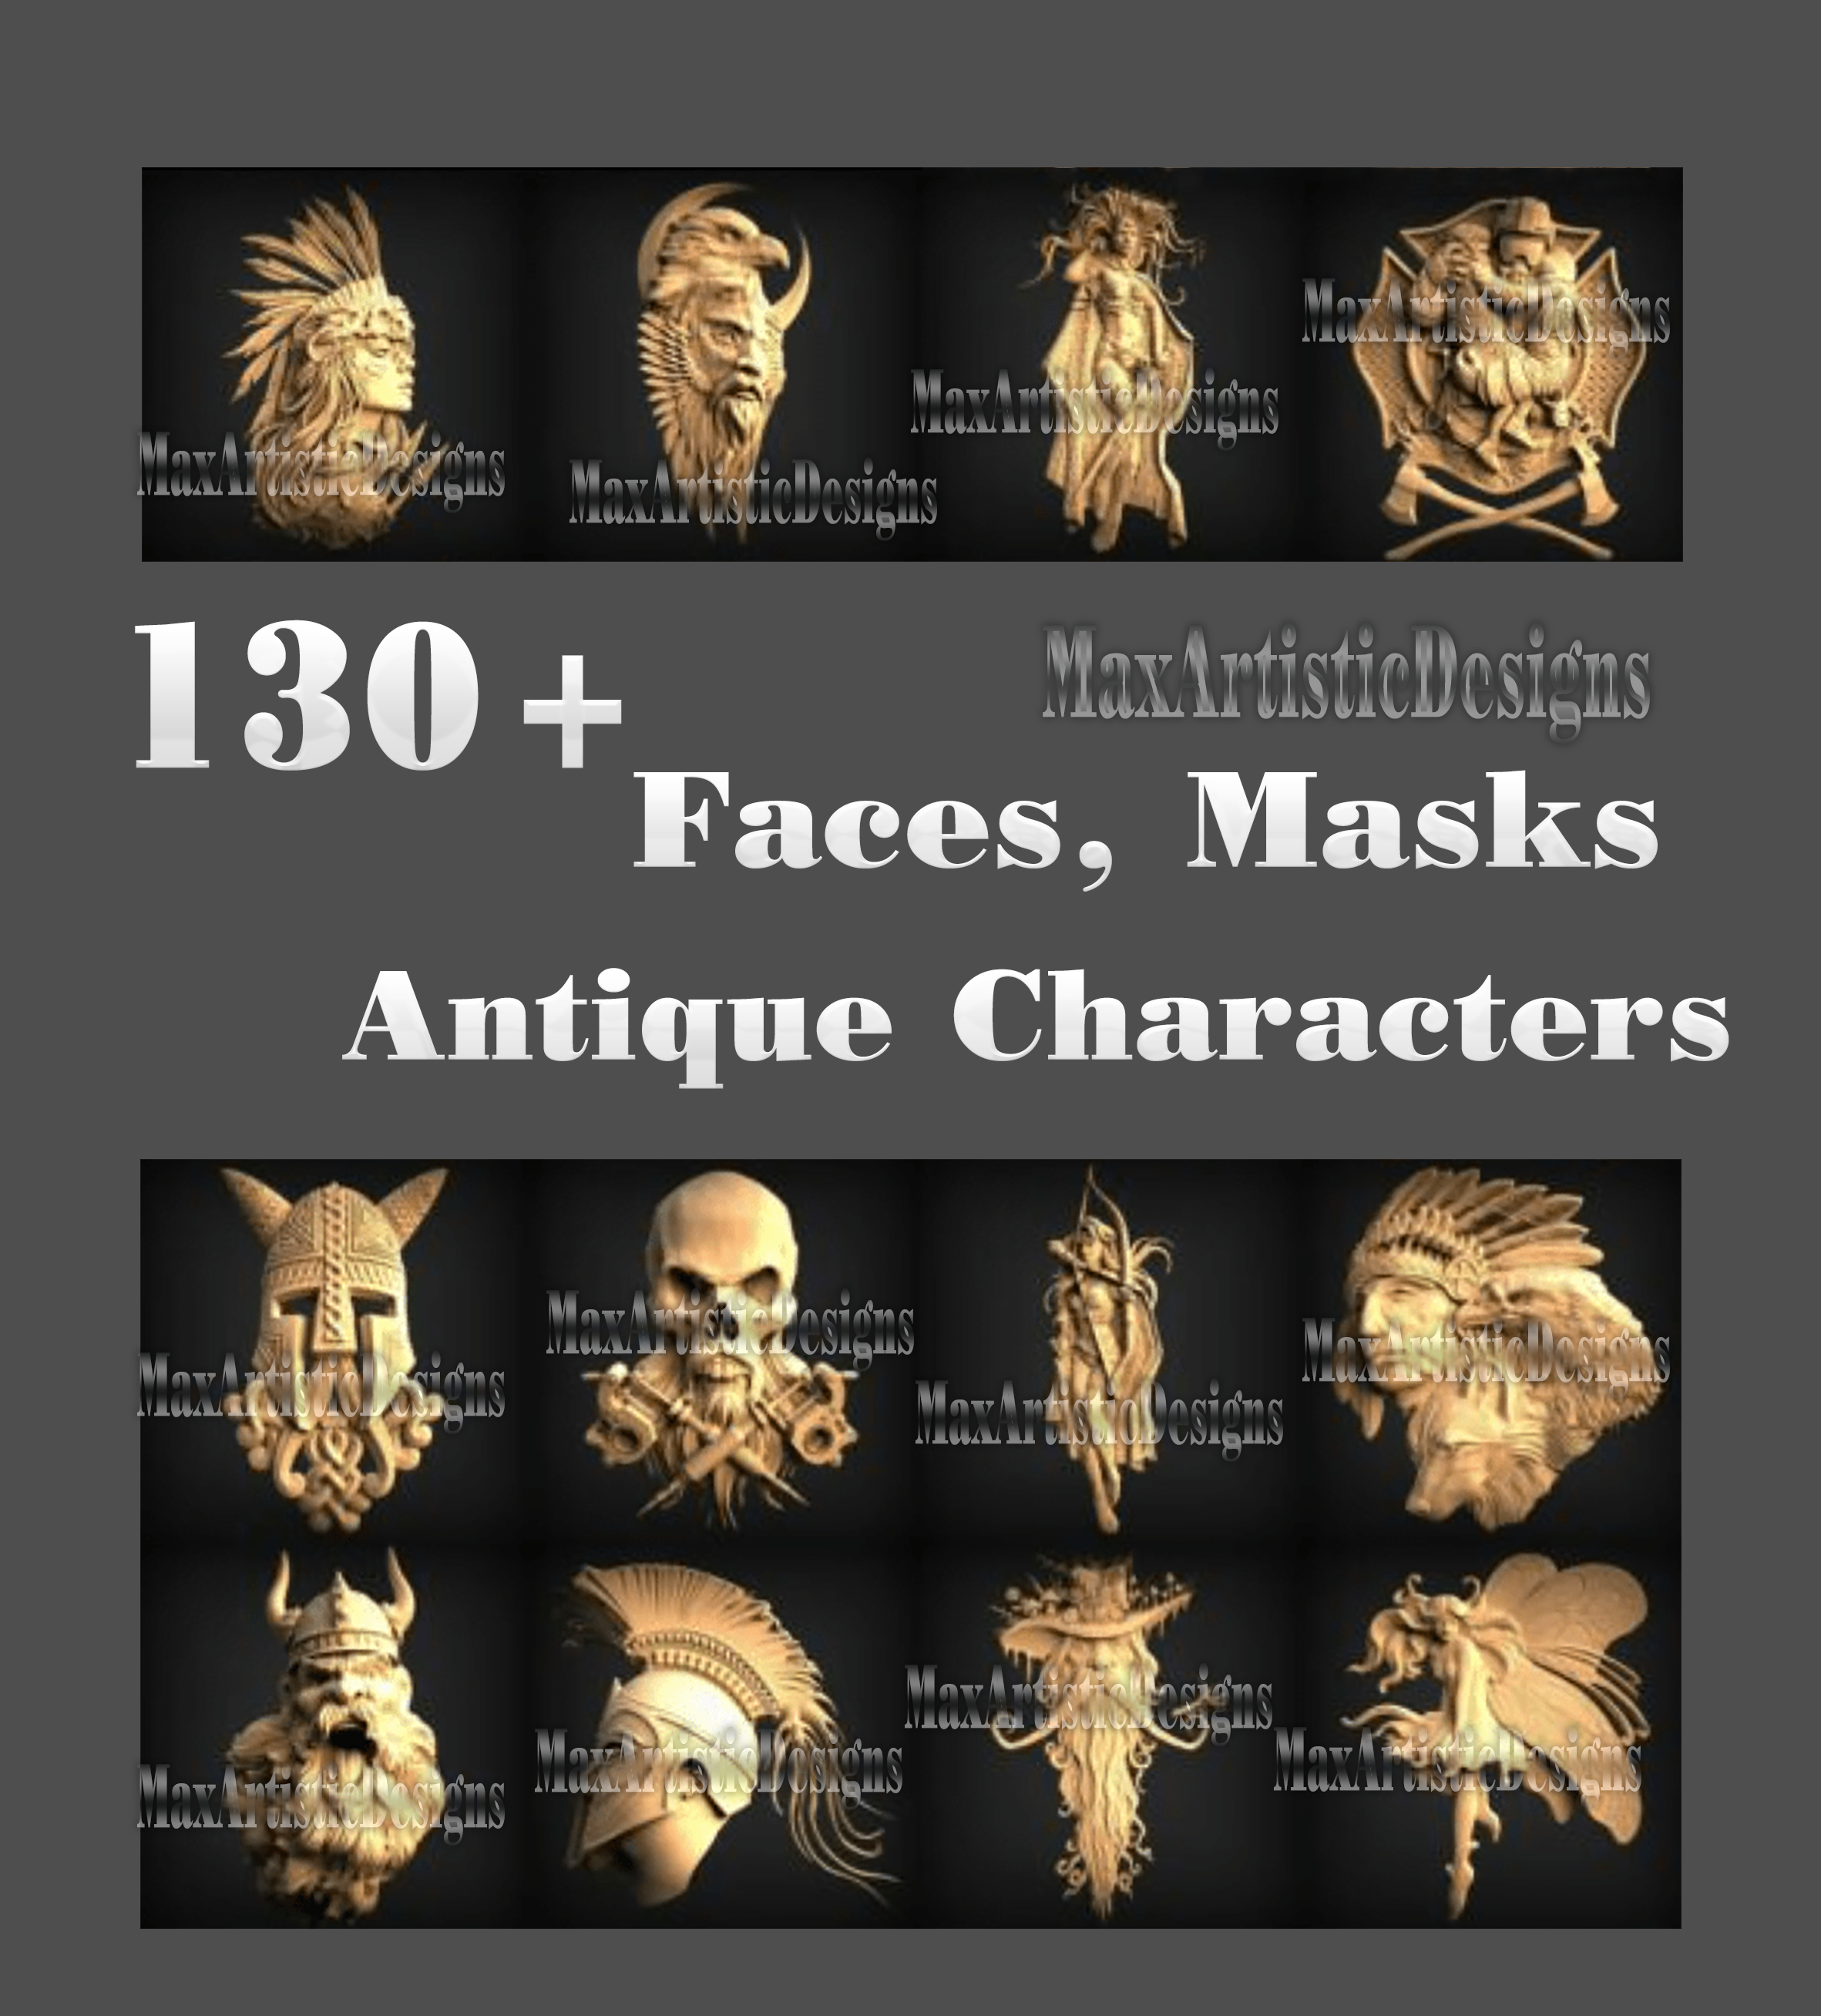 140 3d stl models Faces, masks, antique characters relief engraving carving files for cnc machines 3d printers